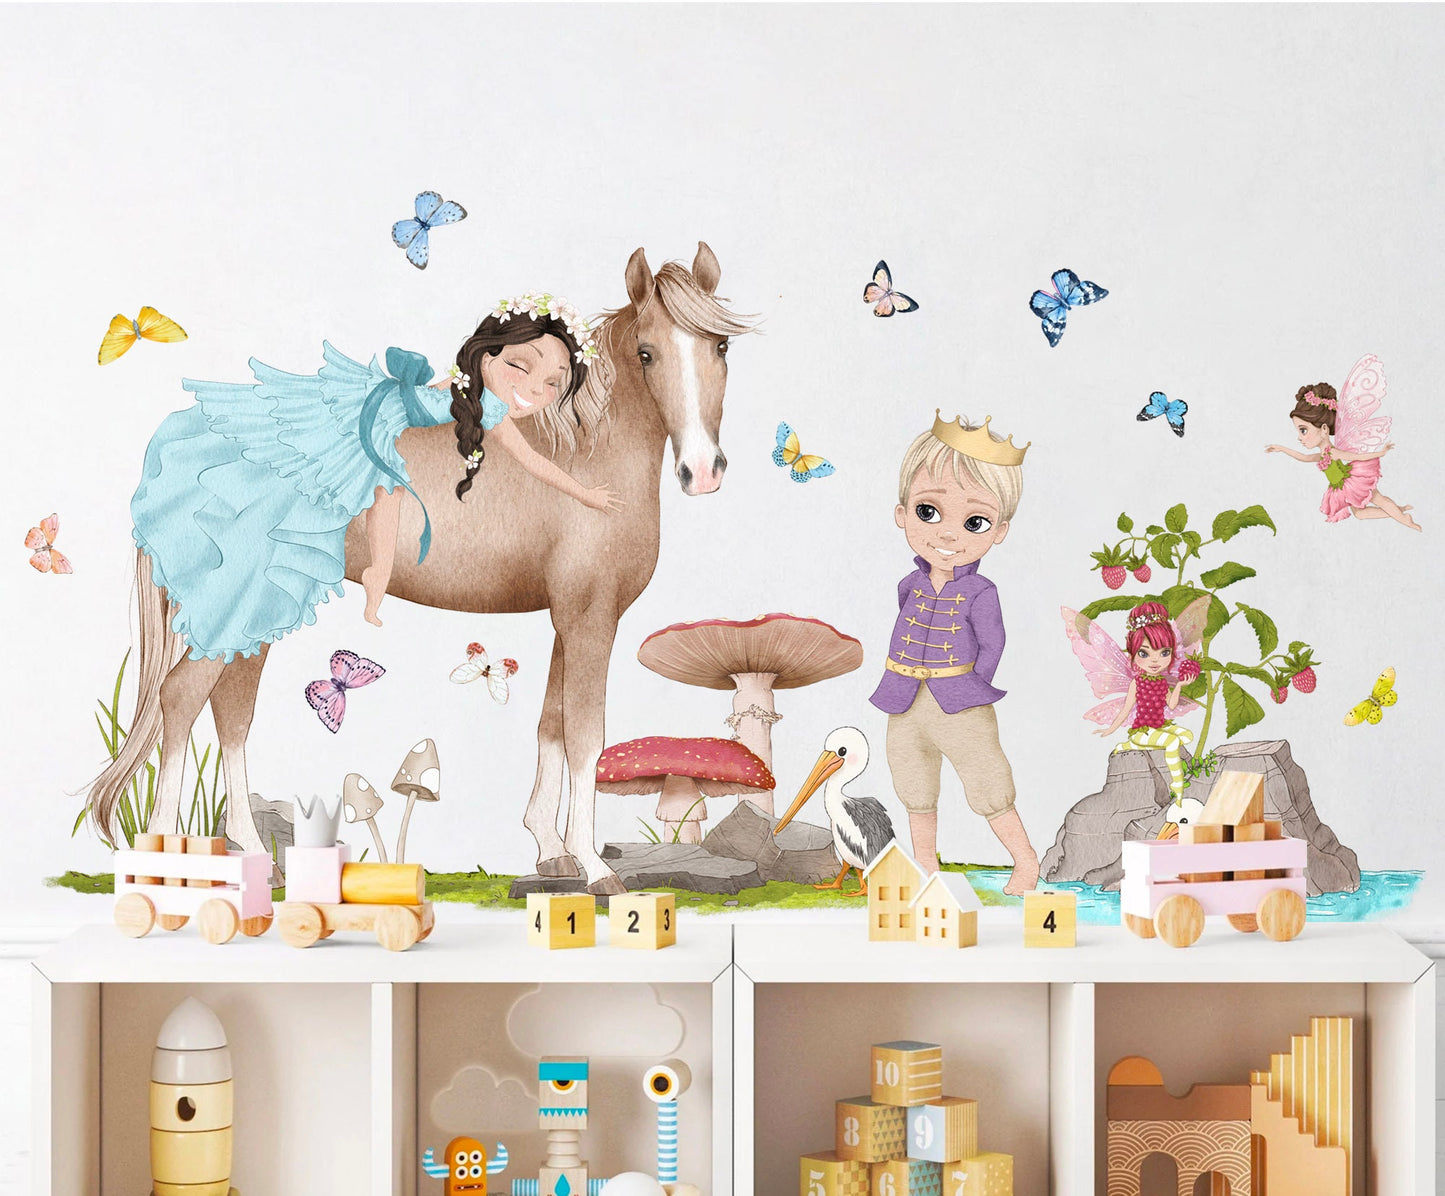 Prince and Princess Riding Wall Decal - Fairy and Red Mushrooms - Girls' Room Decor - BR348